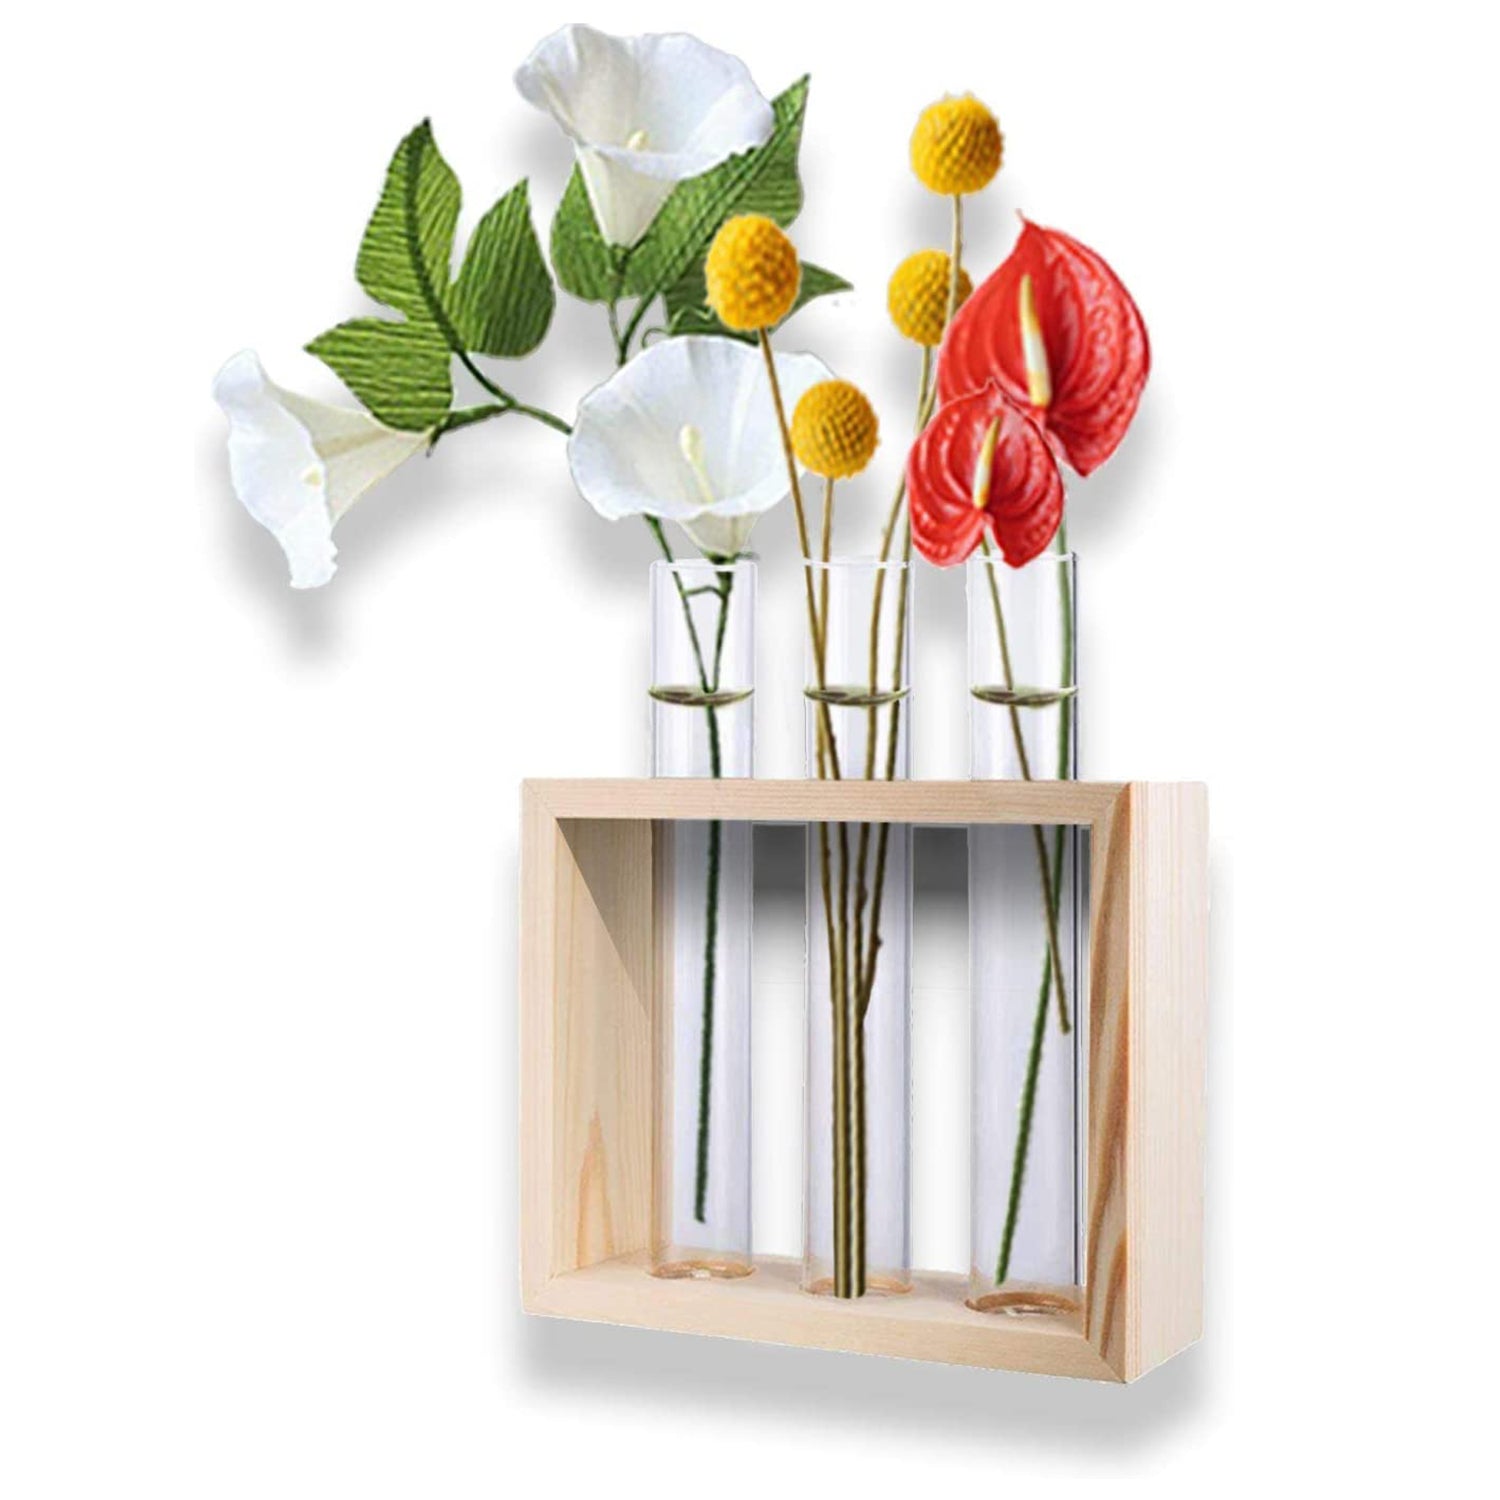 Banord Desktop Glass Terrarium, Wall Hanging Glass Planter with 3 Modern Test Tubes in Wood Stand, Tabletop Tube Container for Home Office Decoration, Natural